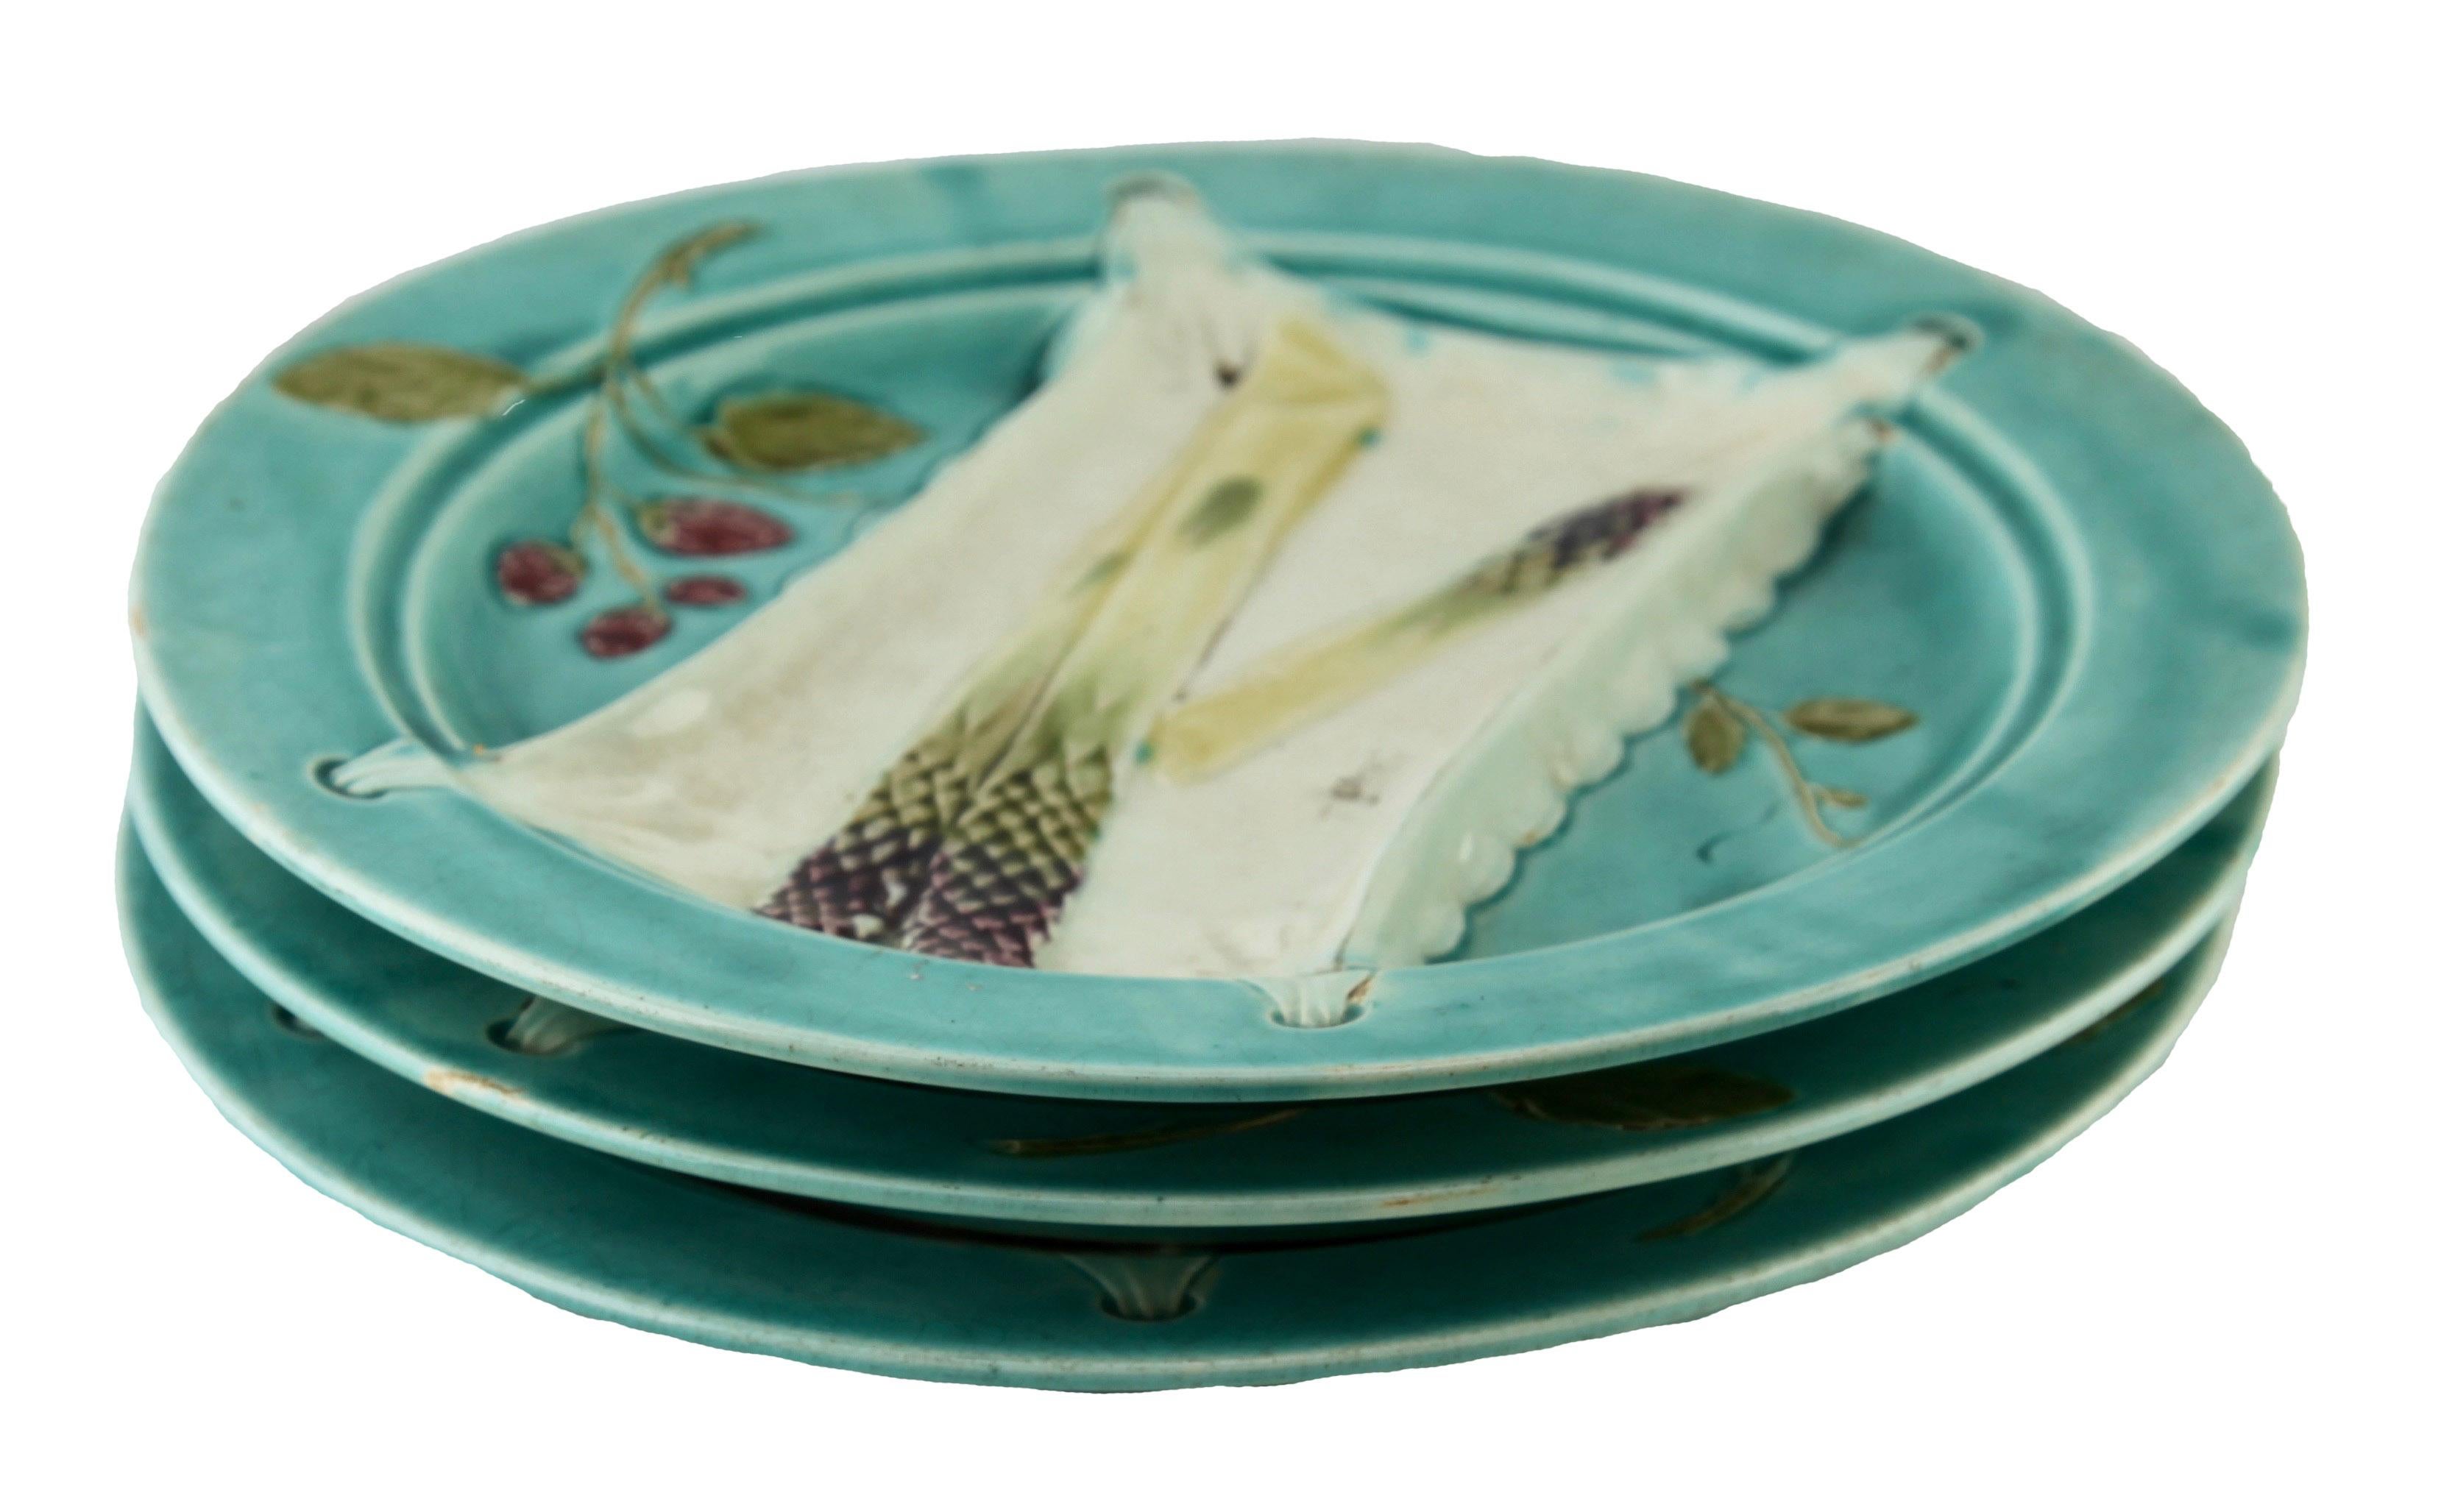 Art Nouveau Majolica glazed tableware set of 3 pieces Asparagus pattern in relief.

Majolica is a type of earthenware, Asparagus decorated with coloured lead glazes. 
Victorian Majolica was made between 1849 and 1900.

Measure: 3 plates